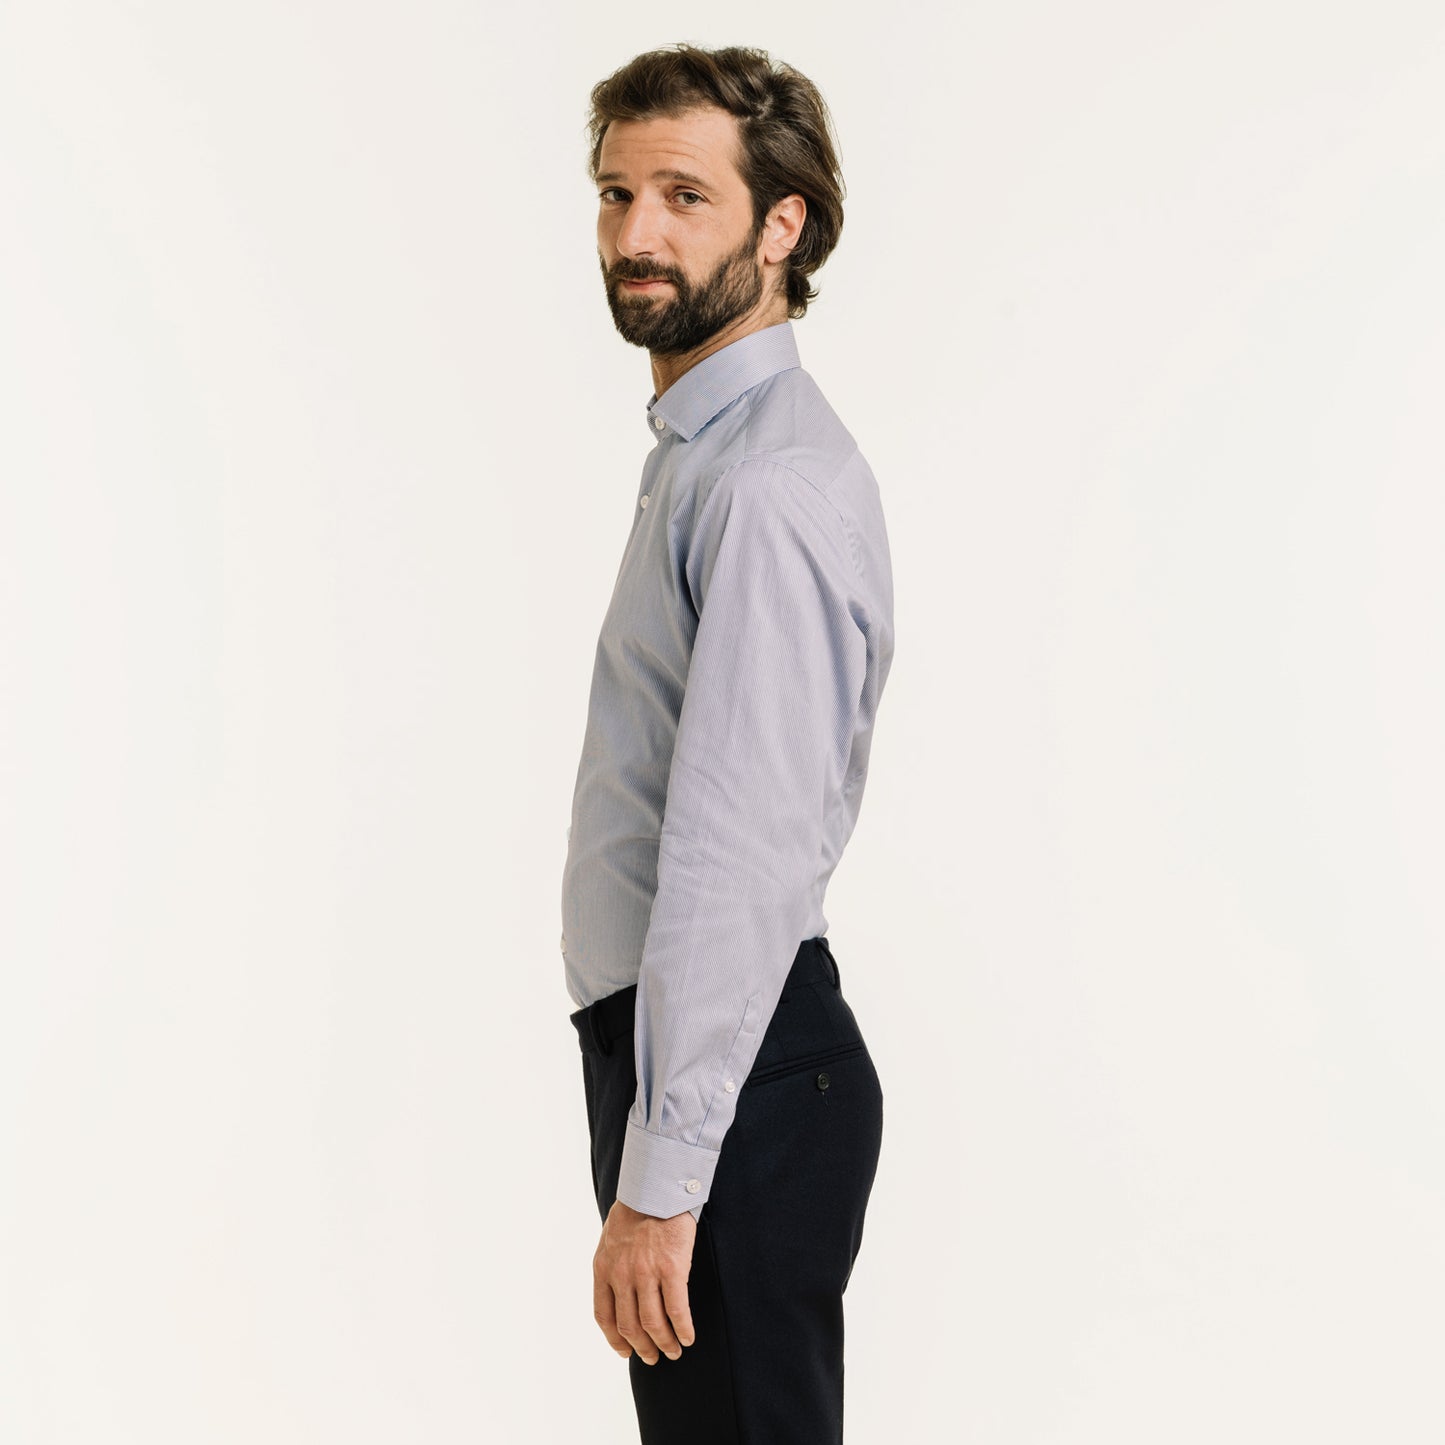 Fitted shirt in double-twisted twill with fine navy blue stripes